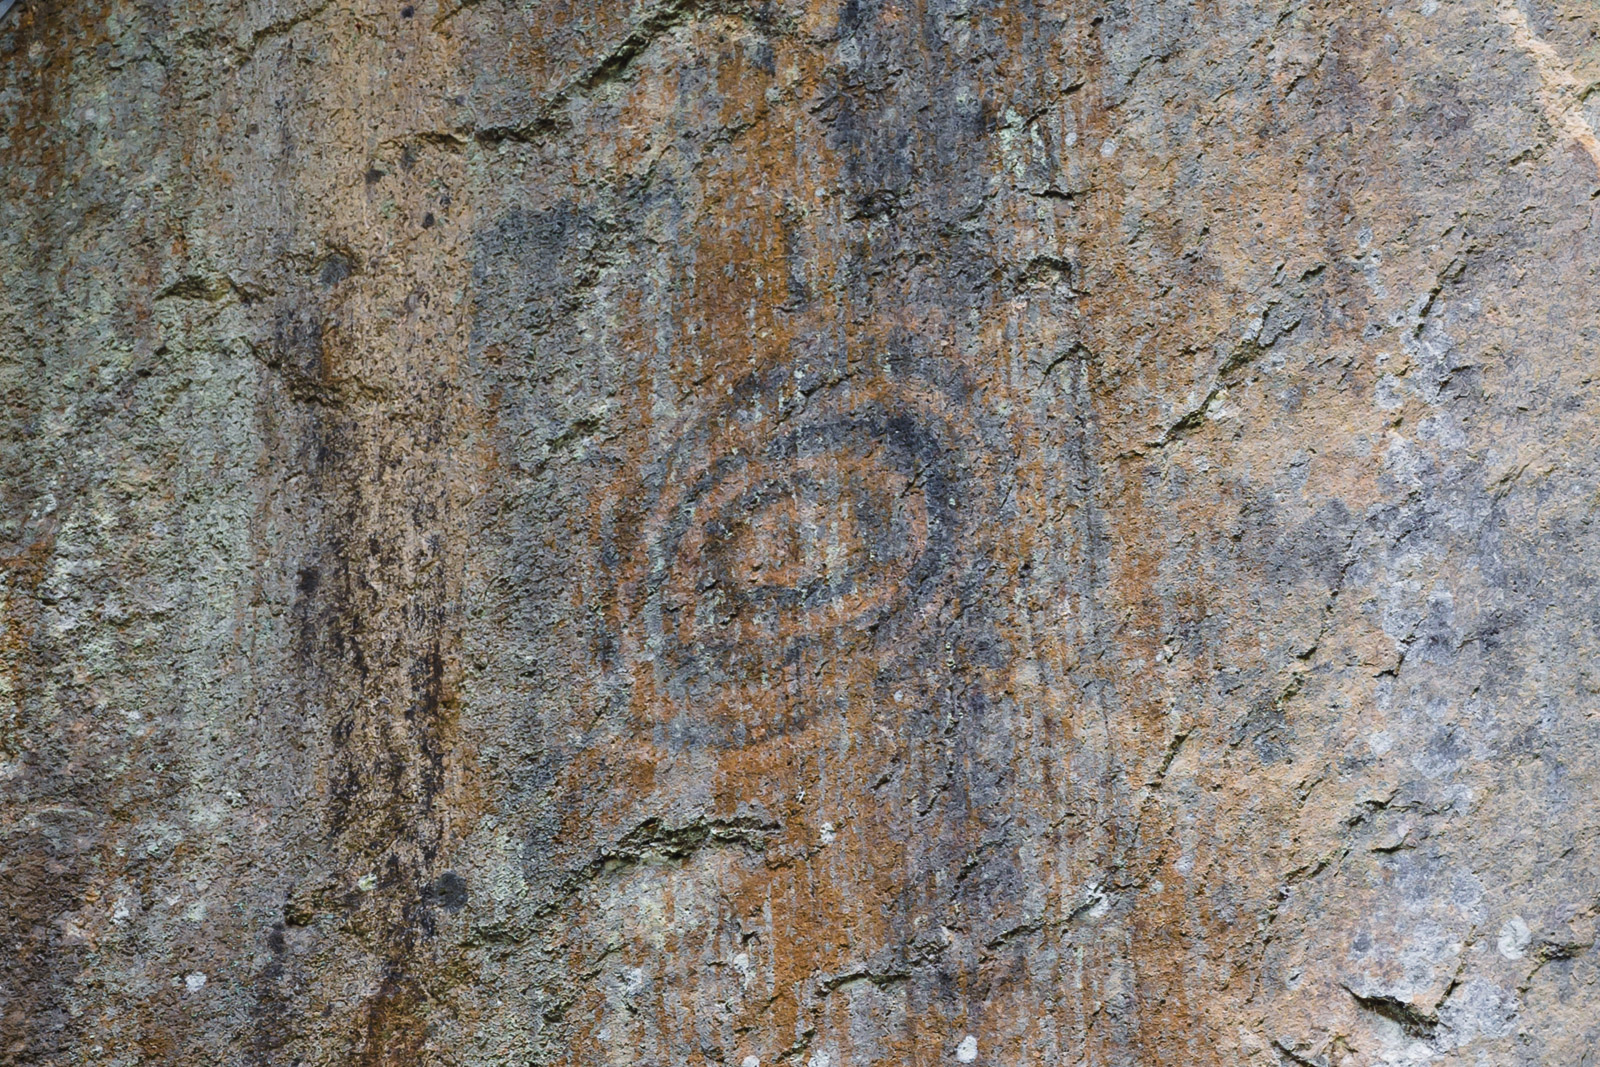 Faded round cliff marking on a rock face at the Inkaterra Machu Picchu Pueblo Hotel